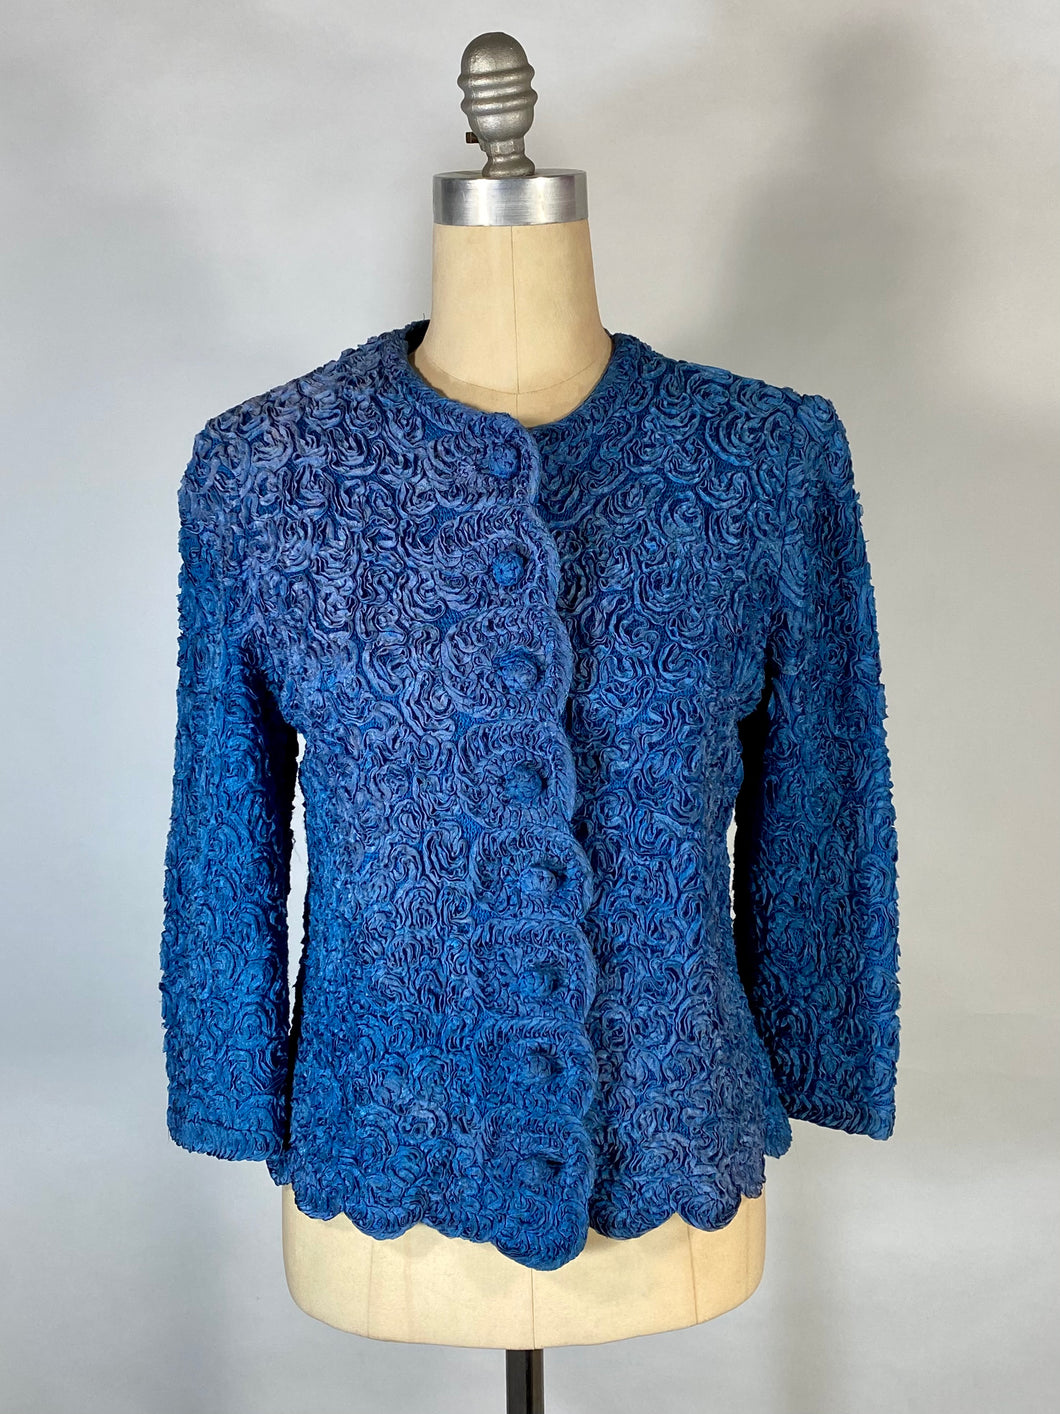 1950’s-60’s blue silk ribbon hand-stitched cardigan sweater-blouse